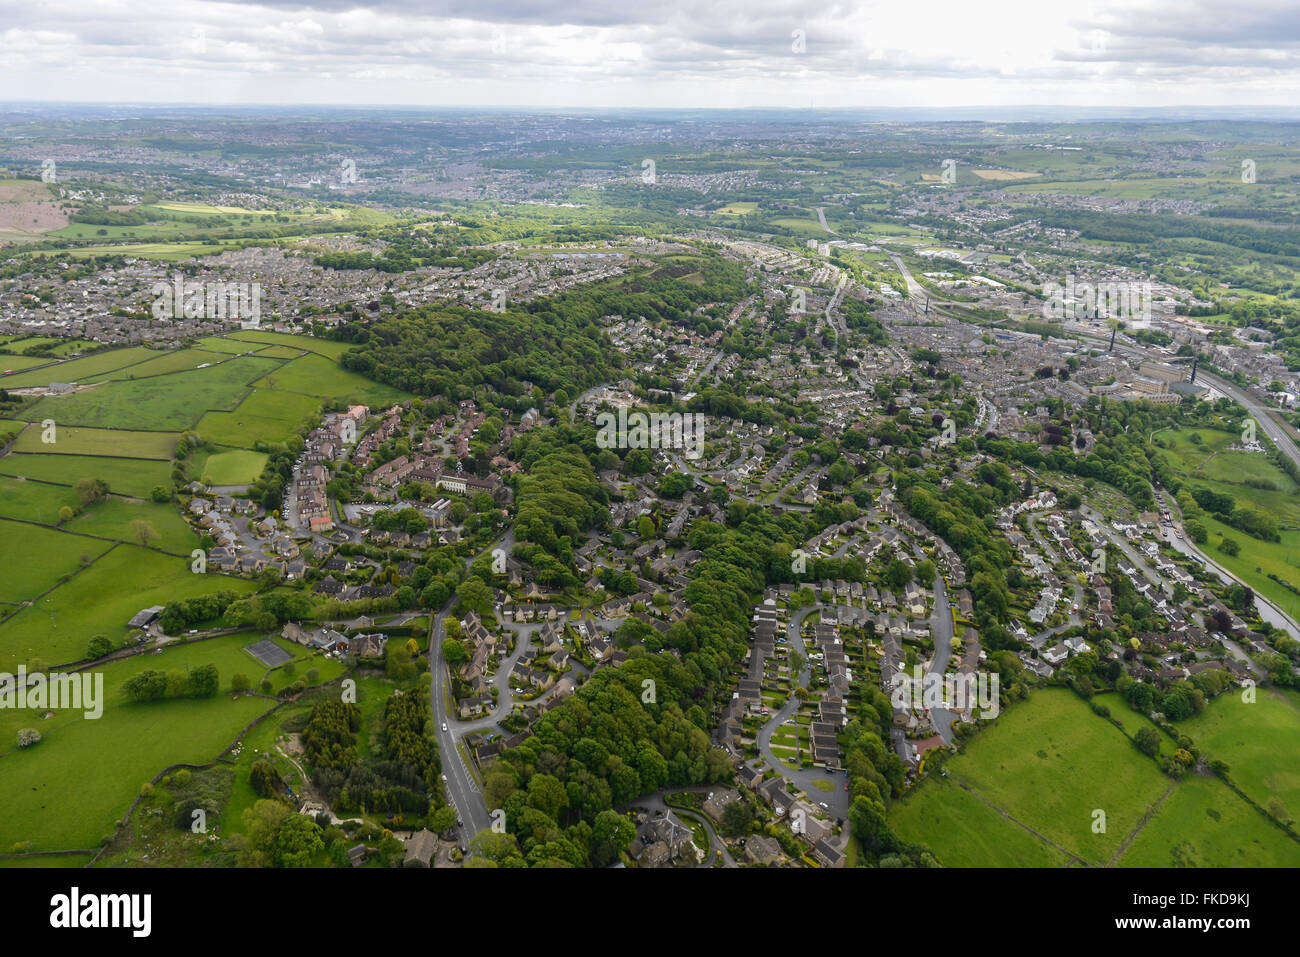 An aerial view of the Priesthorpe area of Bingley, West Yorkshire Stock Photo